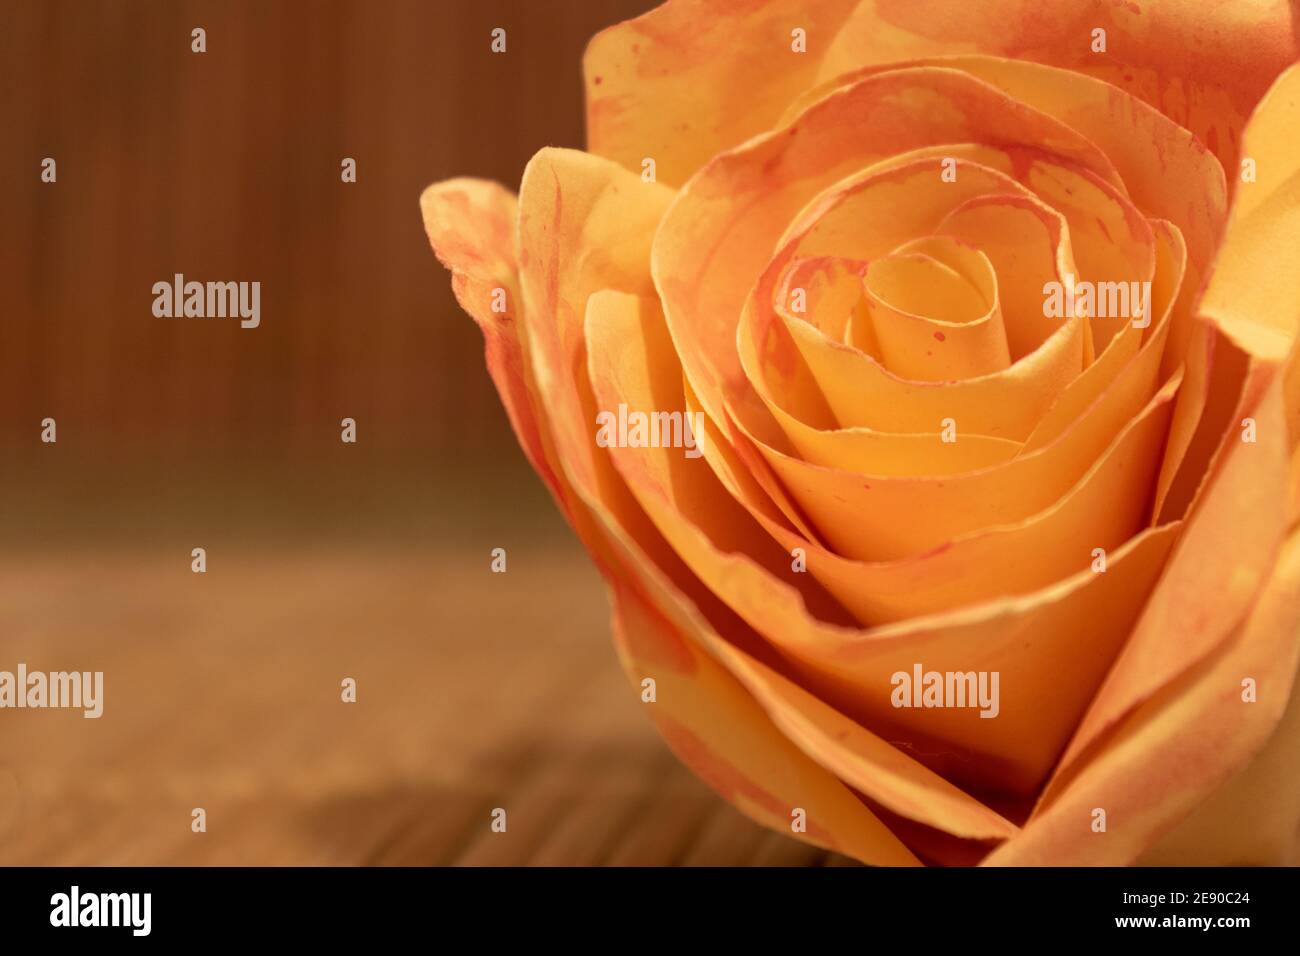 Close up of orange rose blossom made of paper lying on wooden table with copy space. Romantic concept Stock Photo